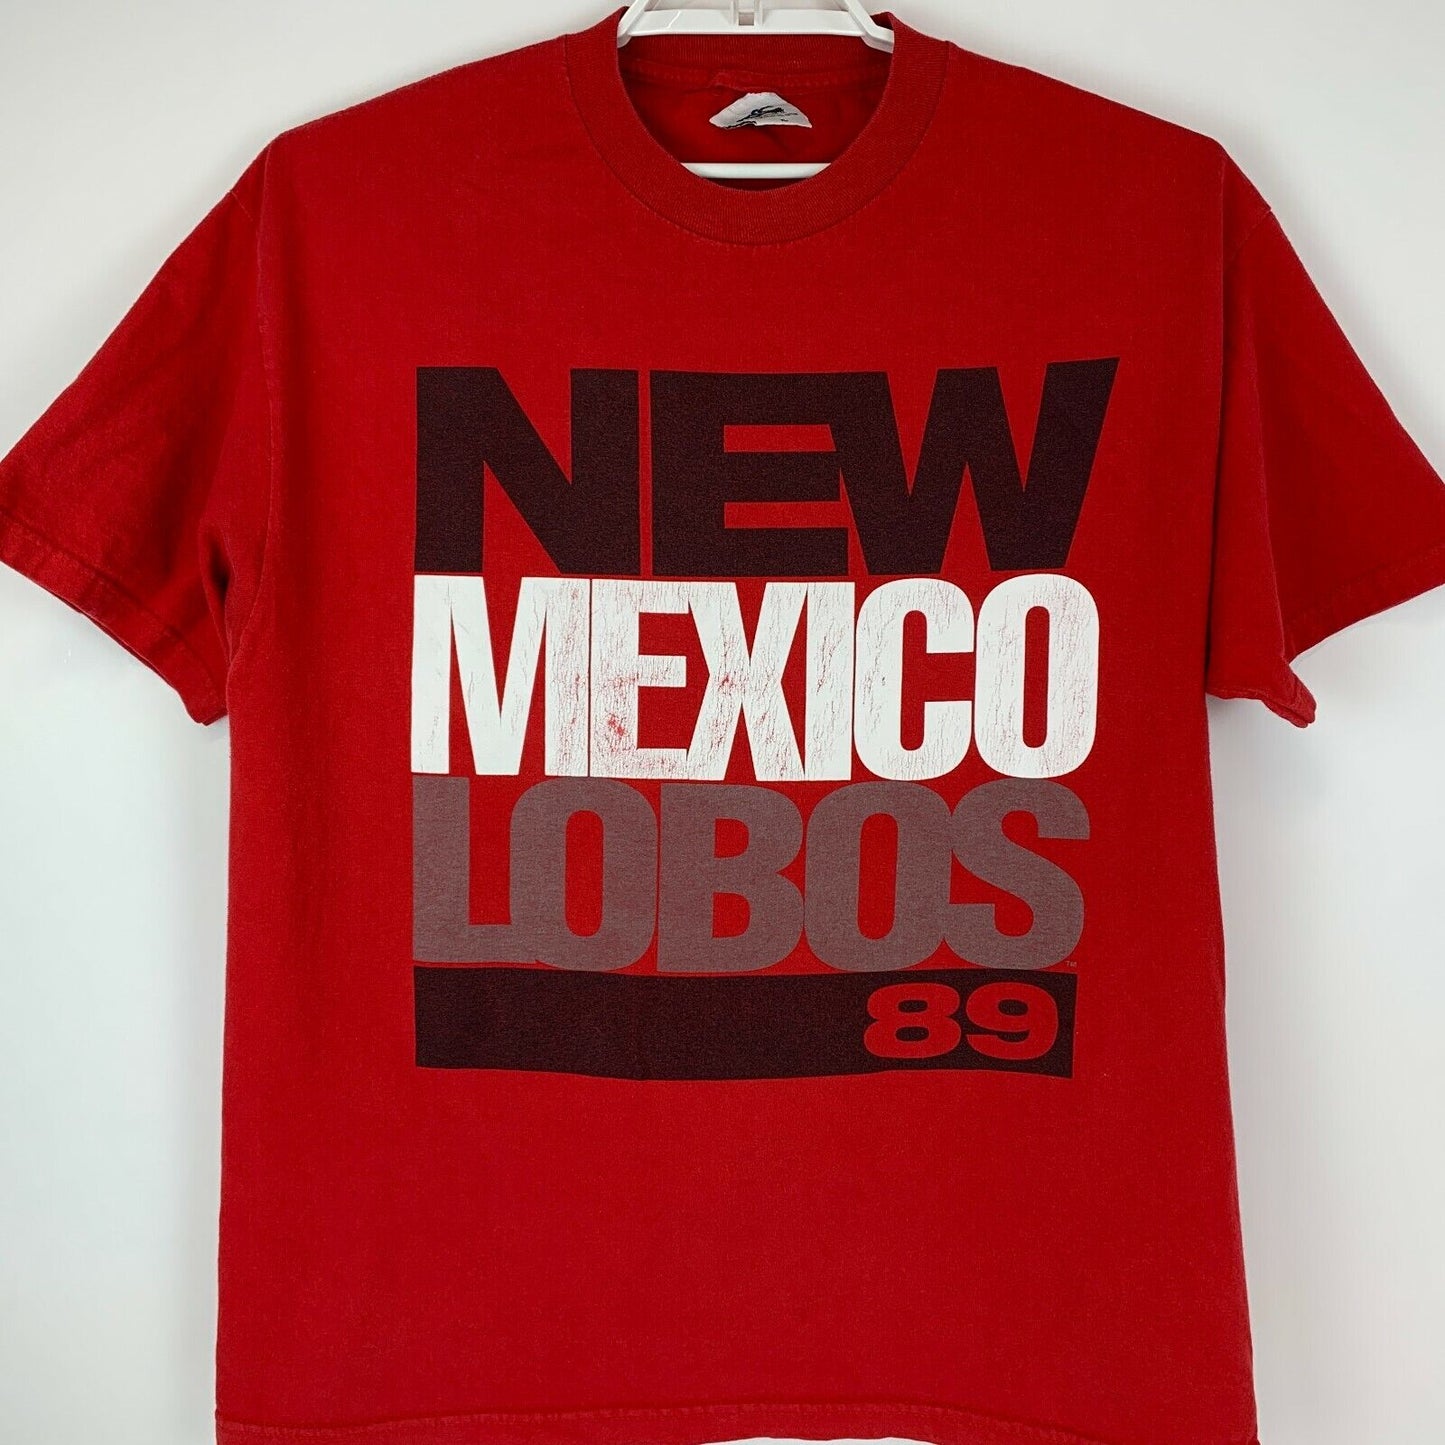 New Mexico Lobos Vintage 80s T Shirt University NCAA UNM 1989 Red Graphic Tee XL